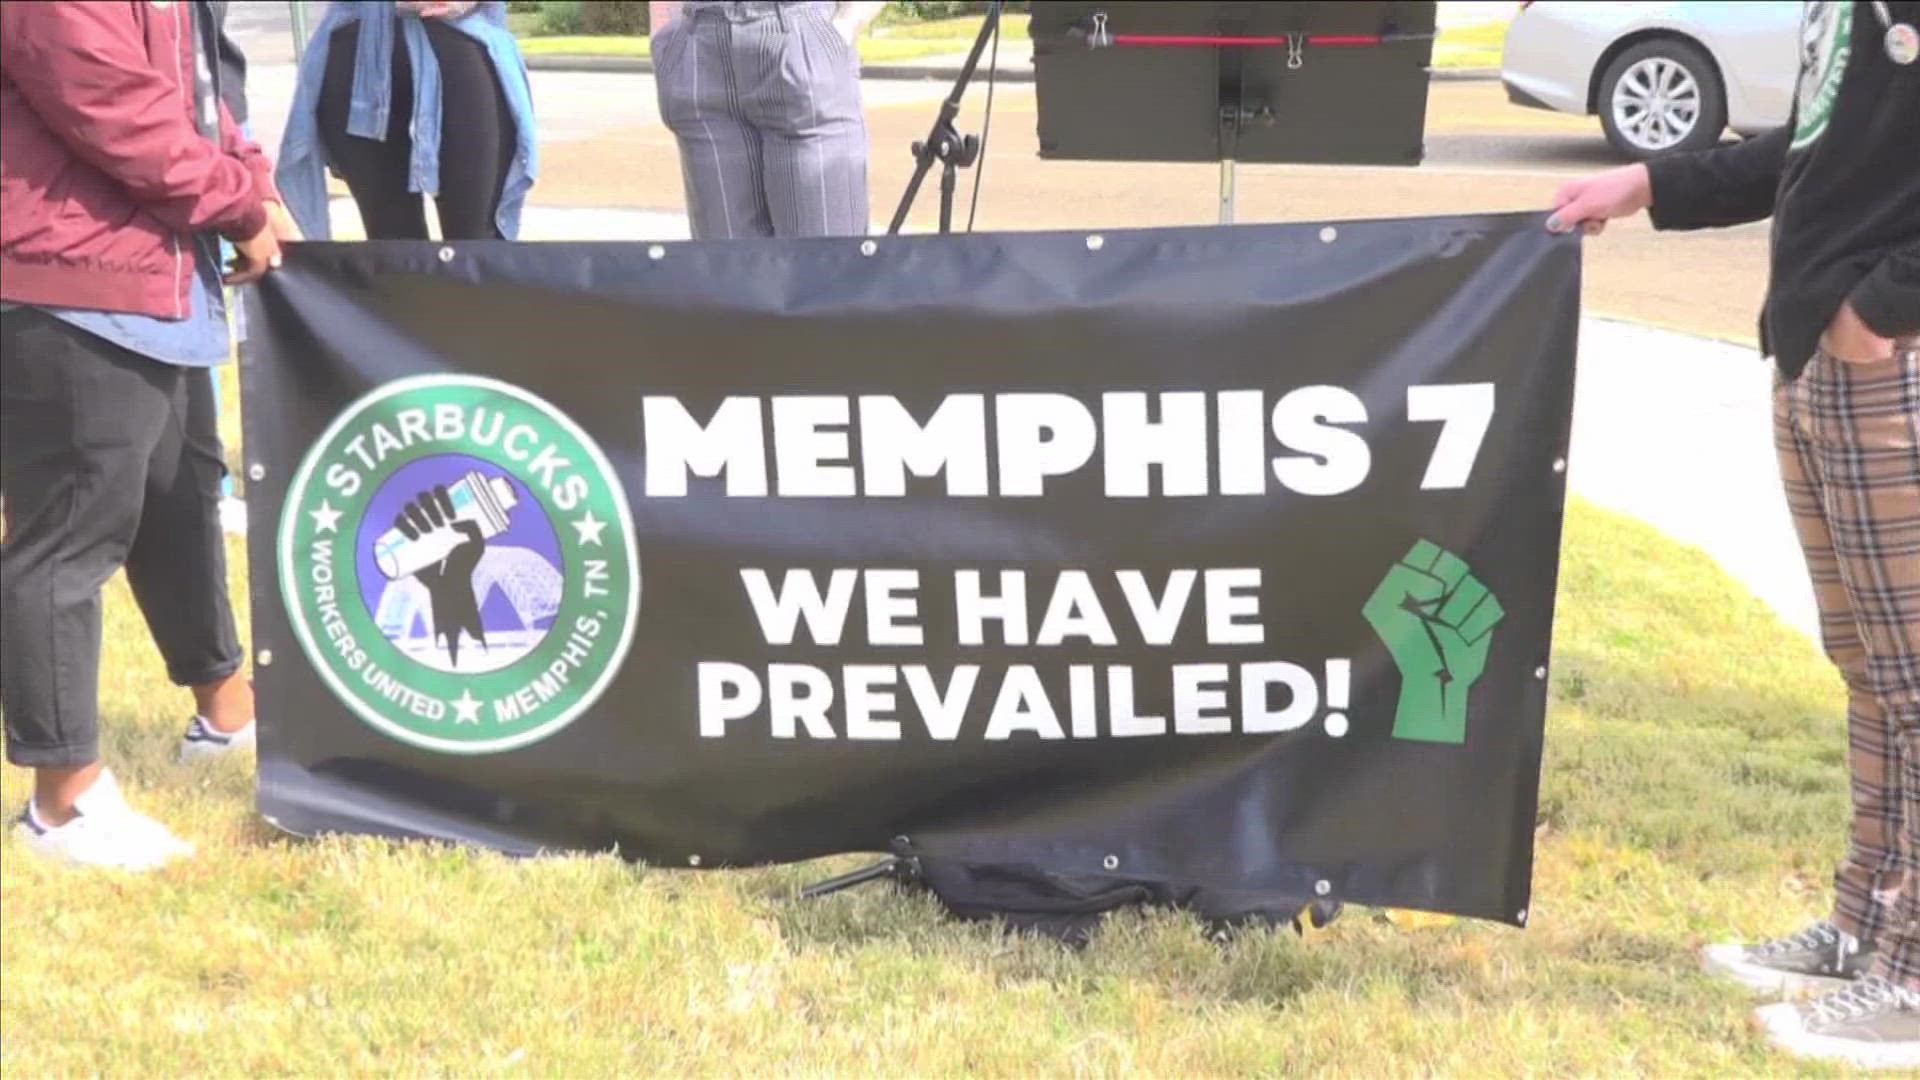 Starbucks was forced to rehire "The Memphis Seven" officially on Saturday. These seven took their case of being unjustly fired to the National Labor Relation Board.